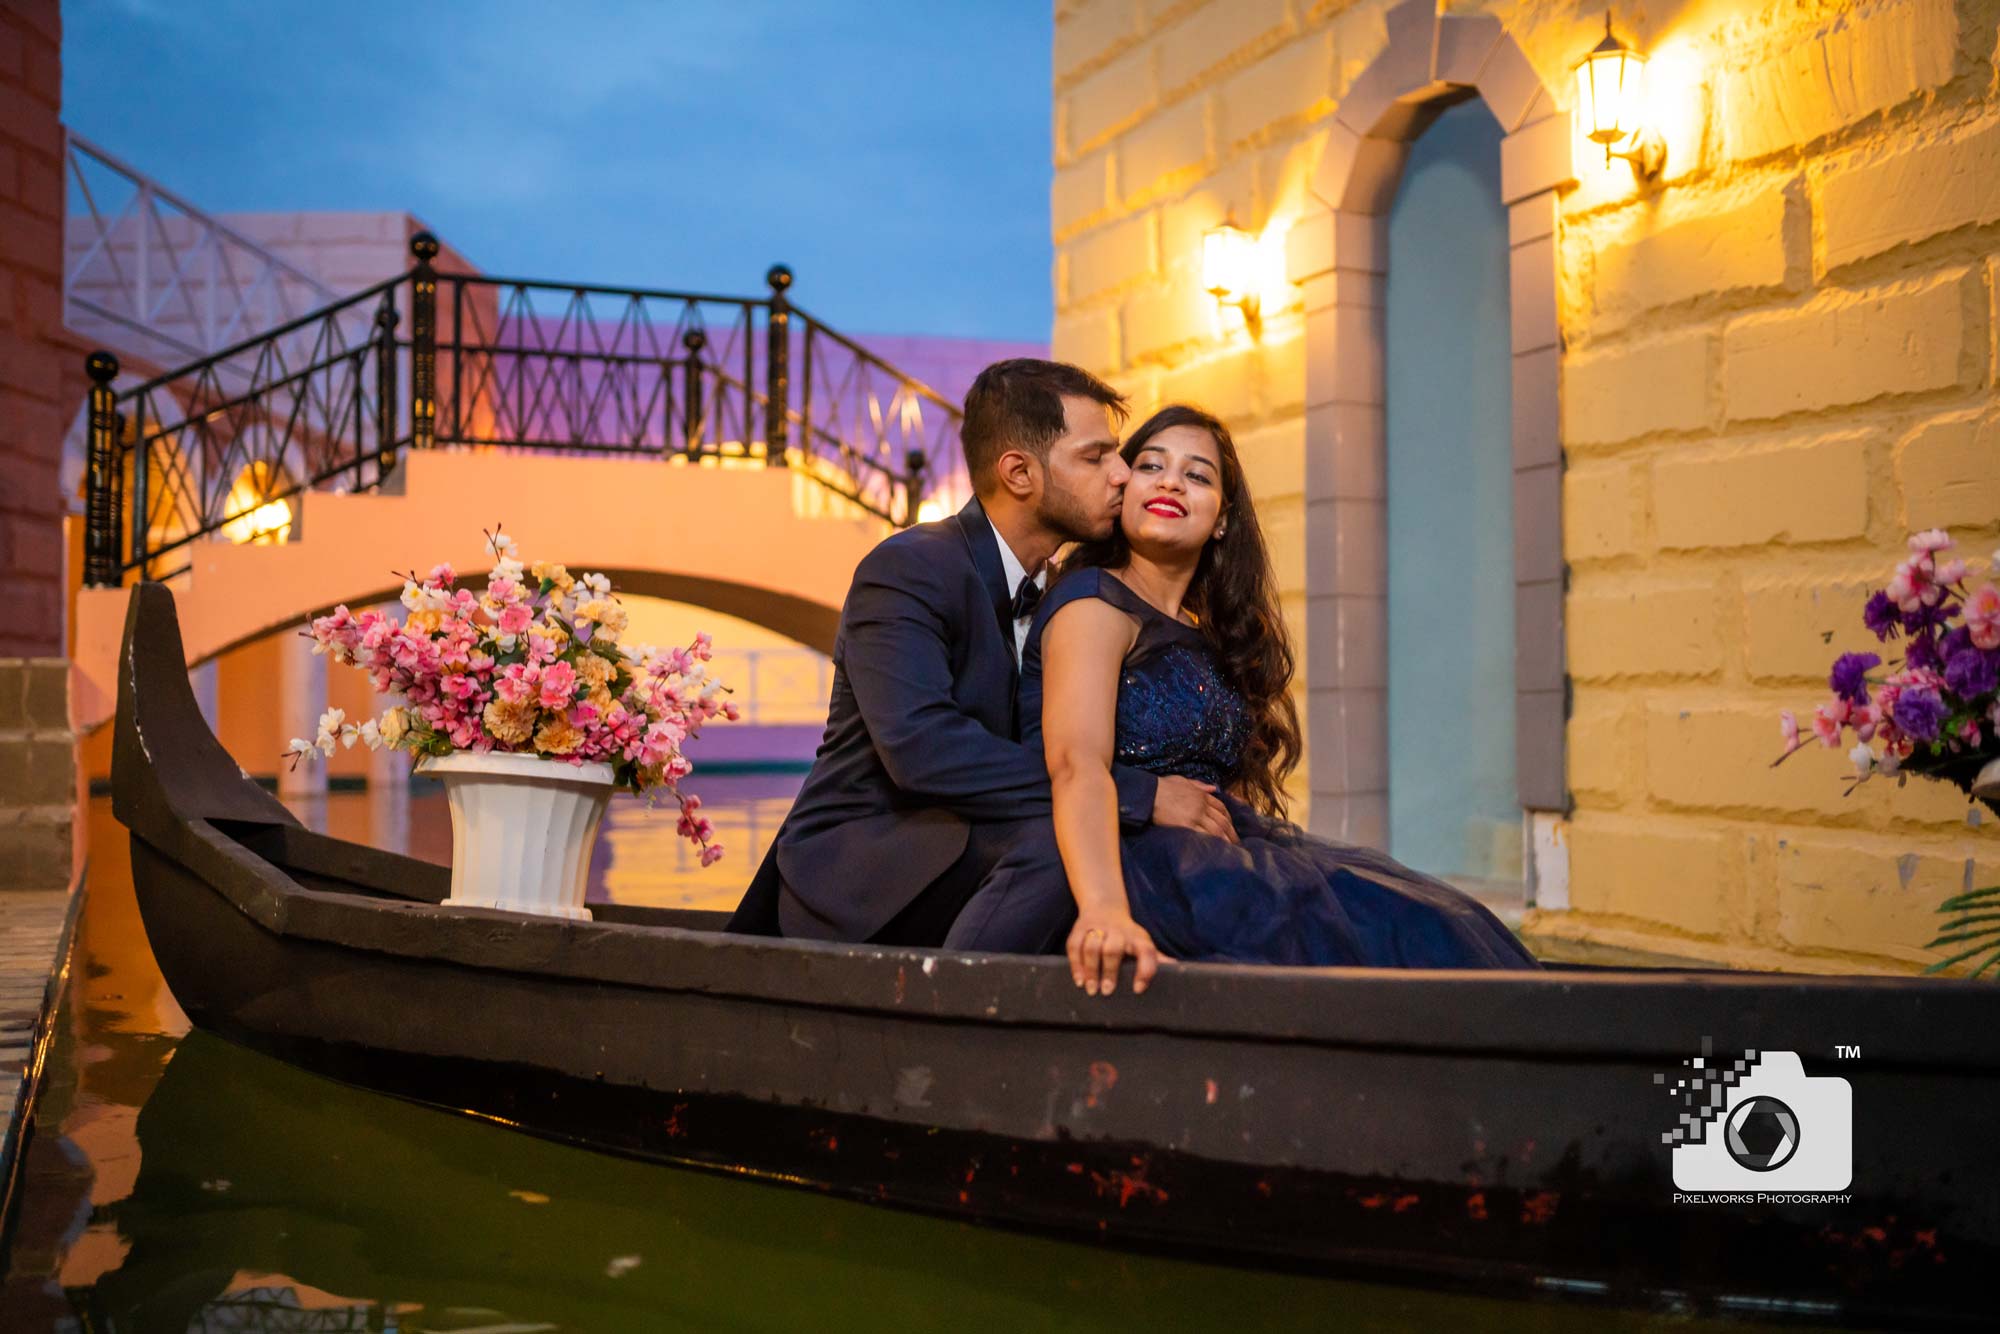 best Pre wedding photographer for sets kiss and boat